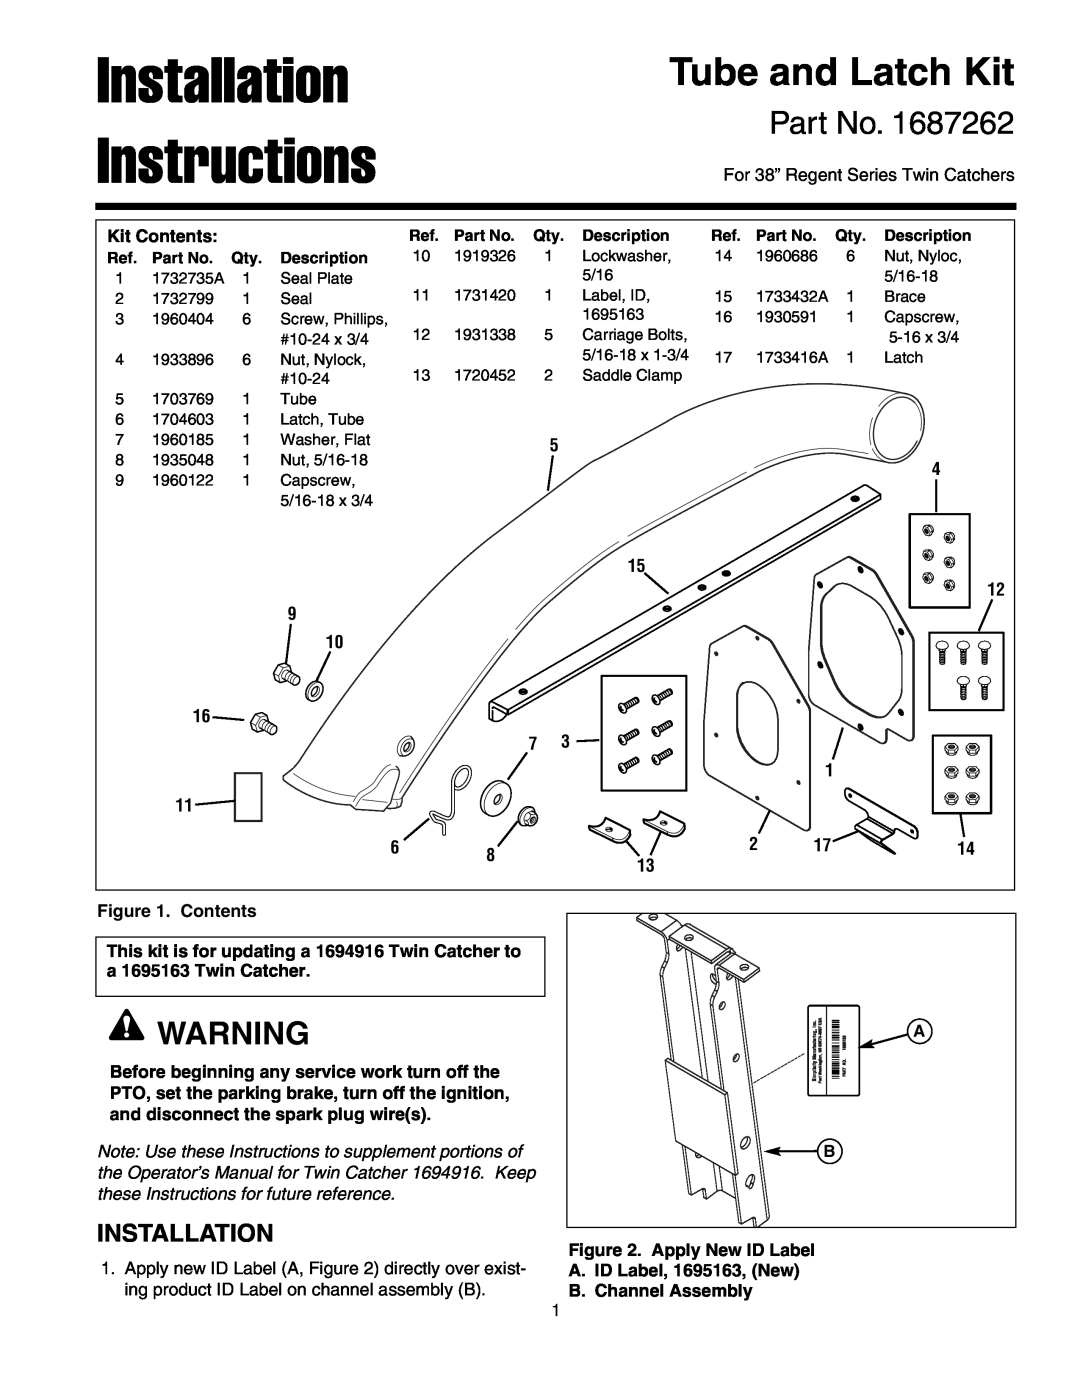 Snapper 1687262 installation instructions Installation, Instructions, Tube and Latch Kit 